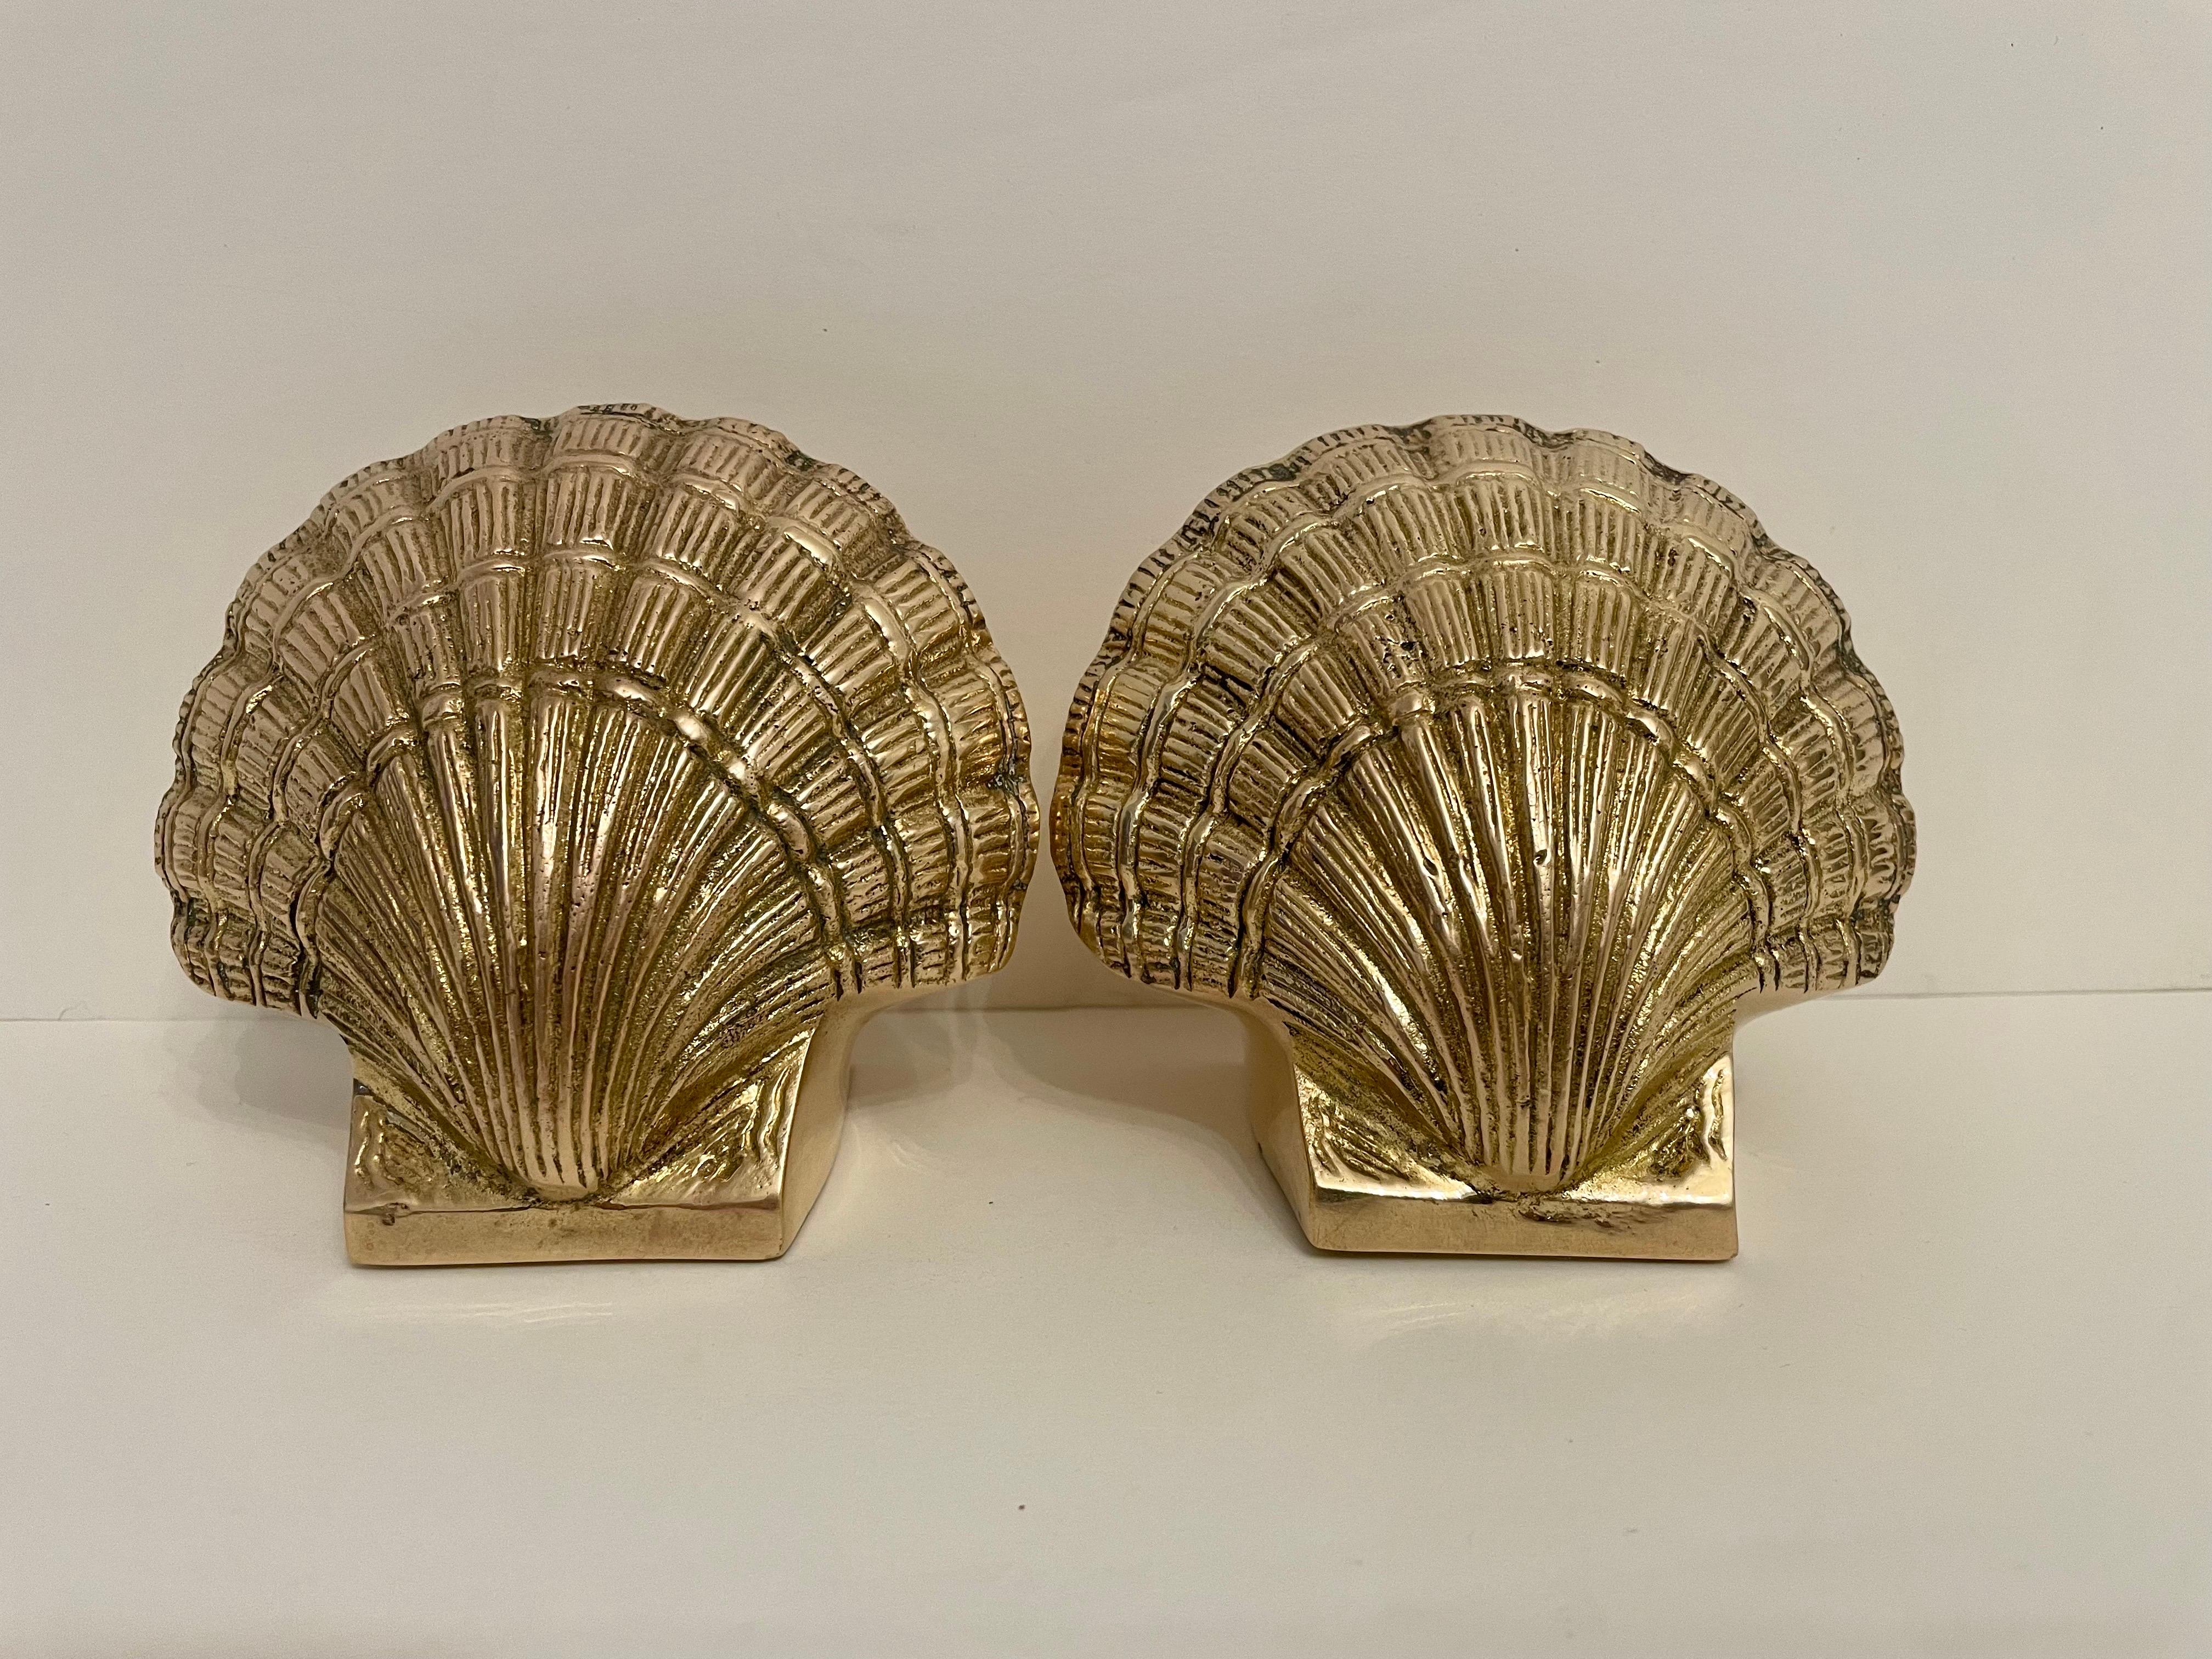 Pair brass scallop or clam shell seashell bookends. Very good detail to the casting. Good condition. Any dark spots are reflection only. Hand Polished, ready to use.